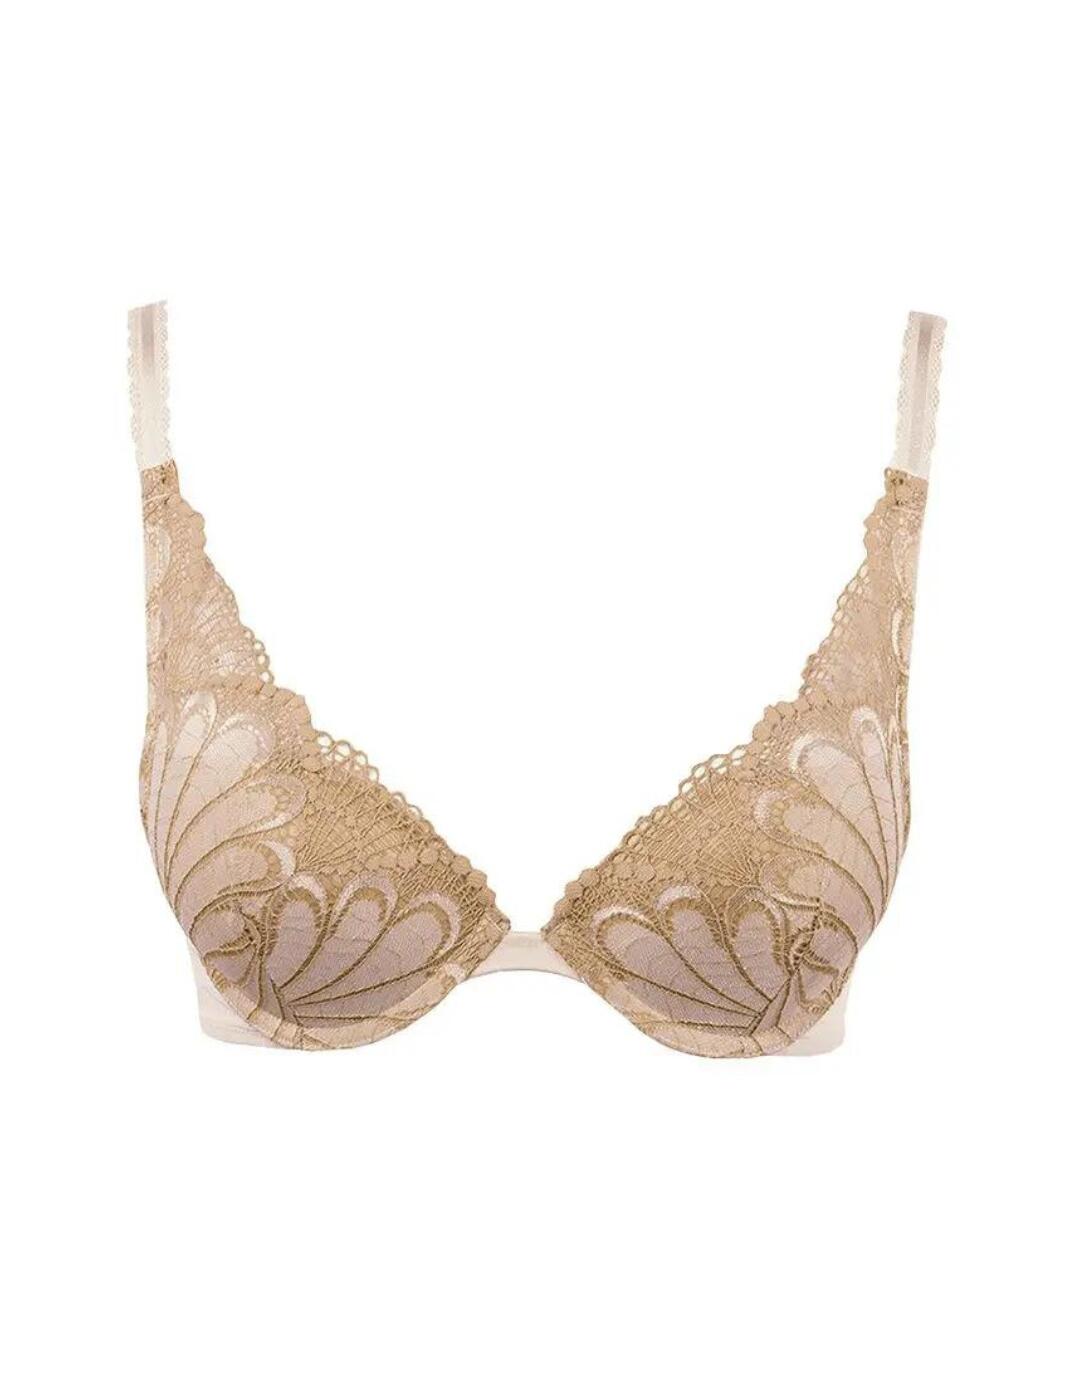 Wonderbra Women's Refined Glamour Full Effect Push-up Bra, Ivory, 36D -  Discount Scrubs and Fashion